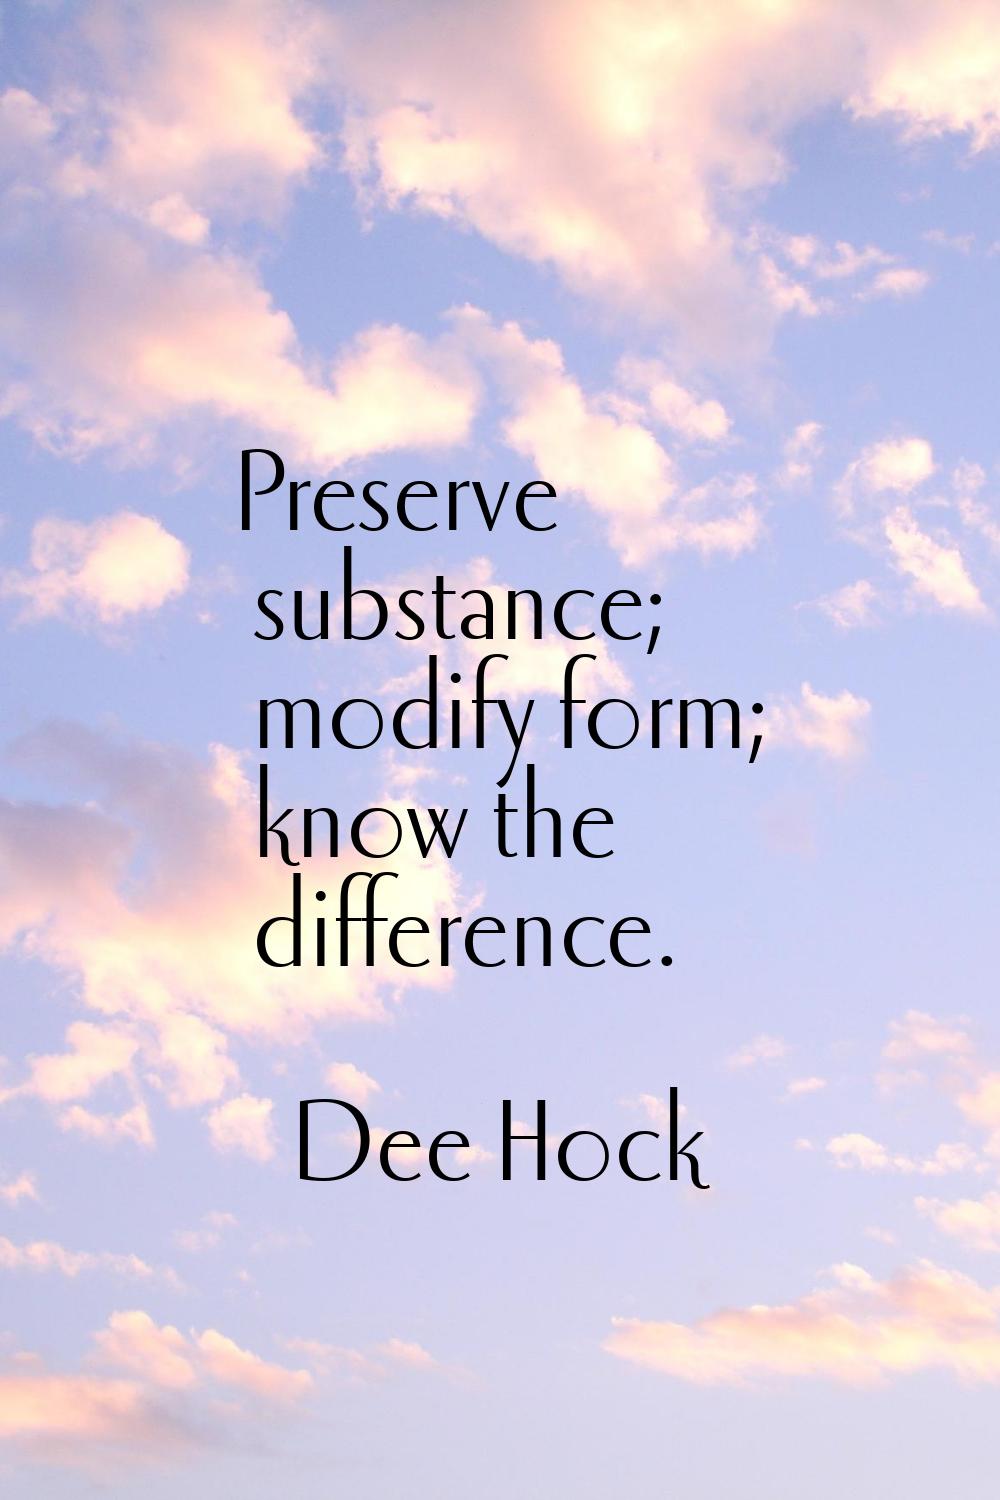 Preserve substance; modify form; know the difference.